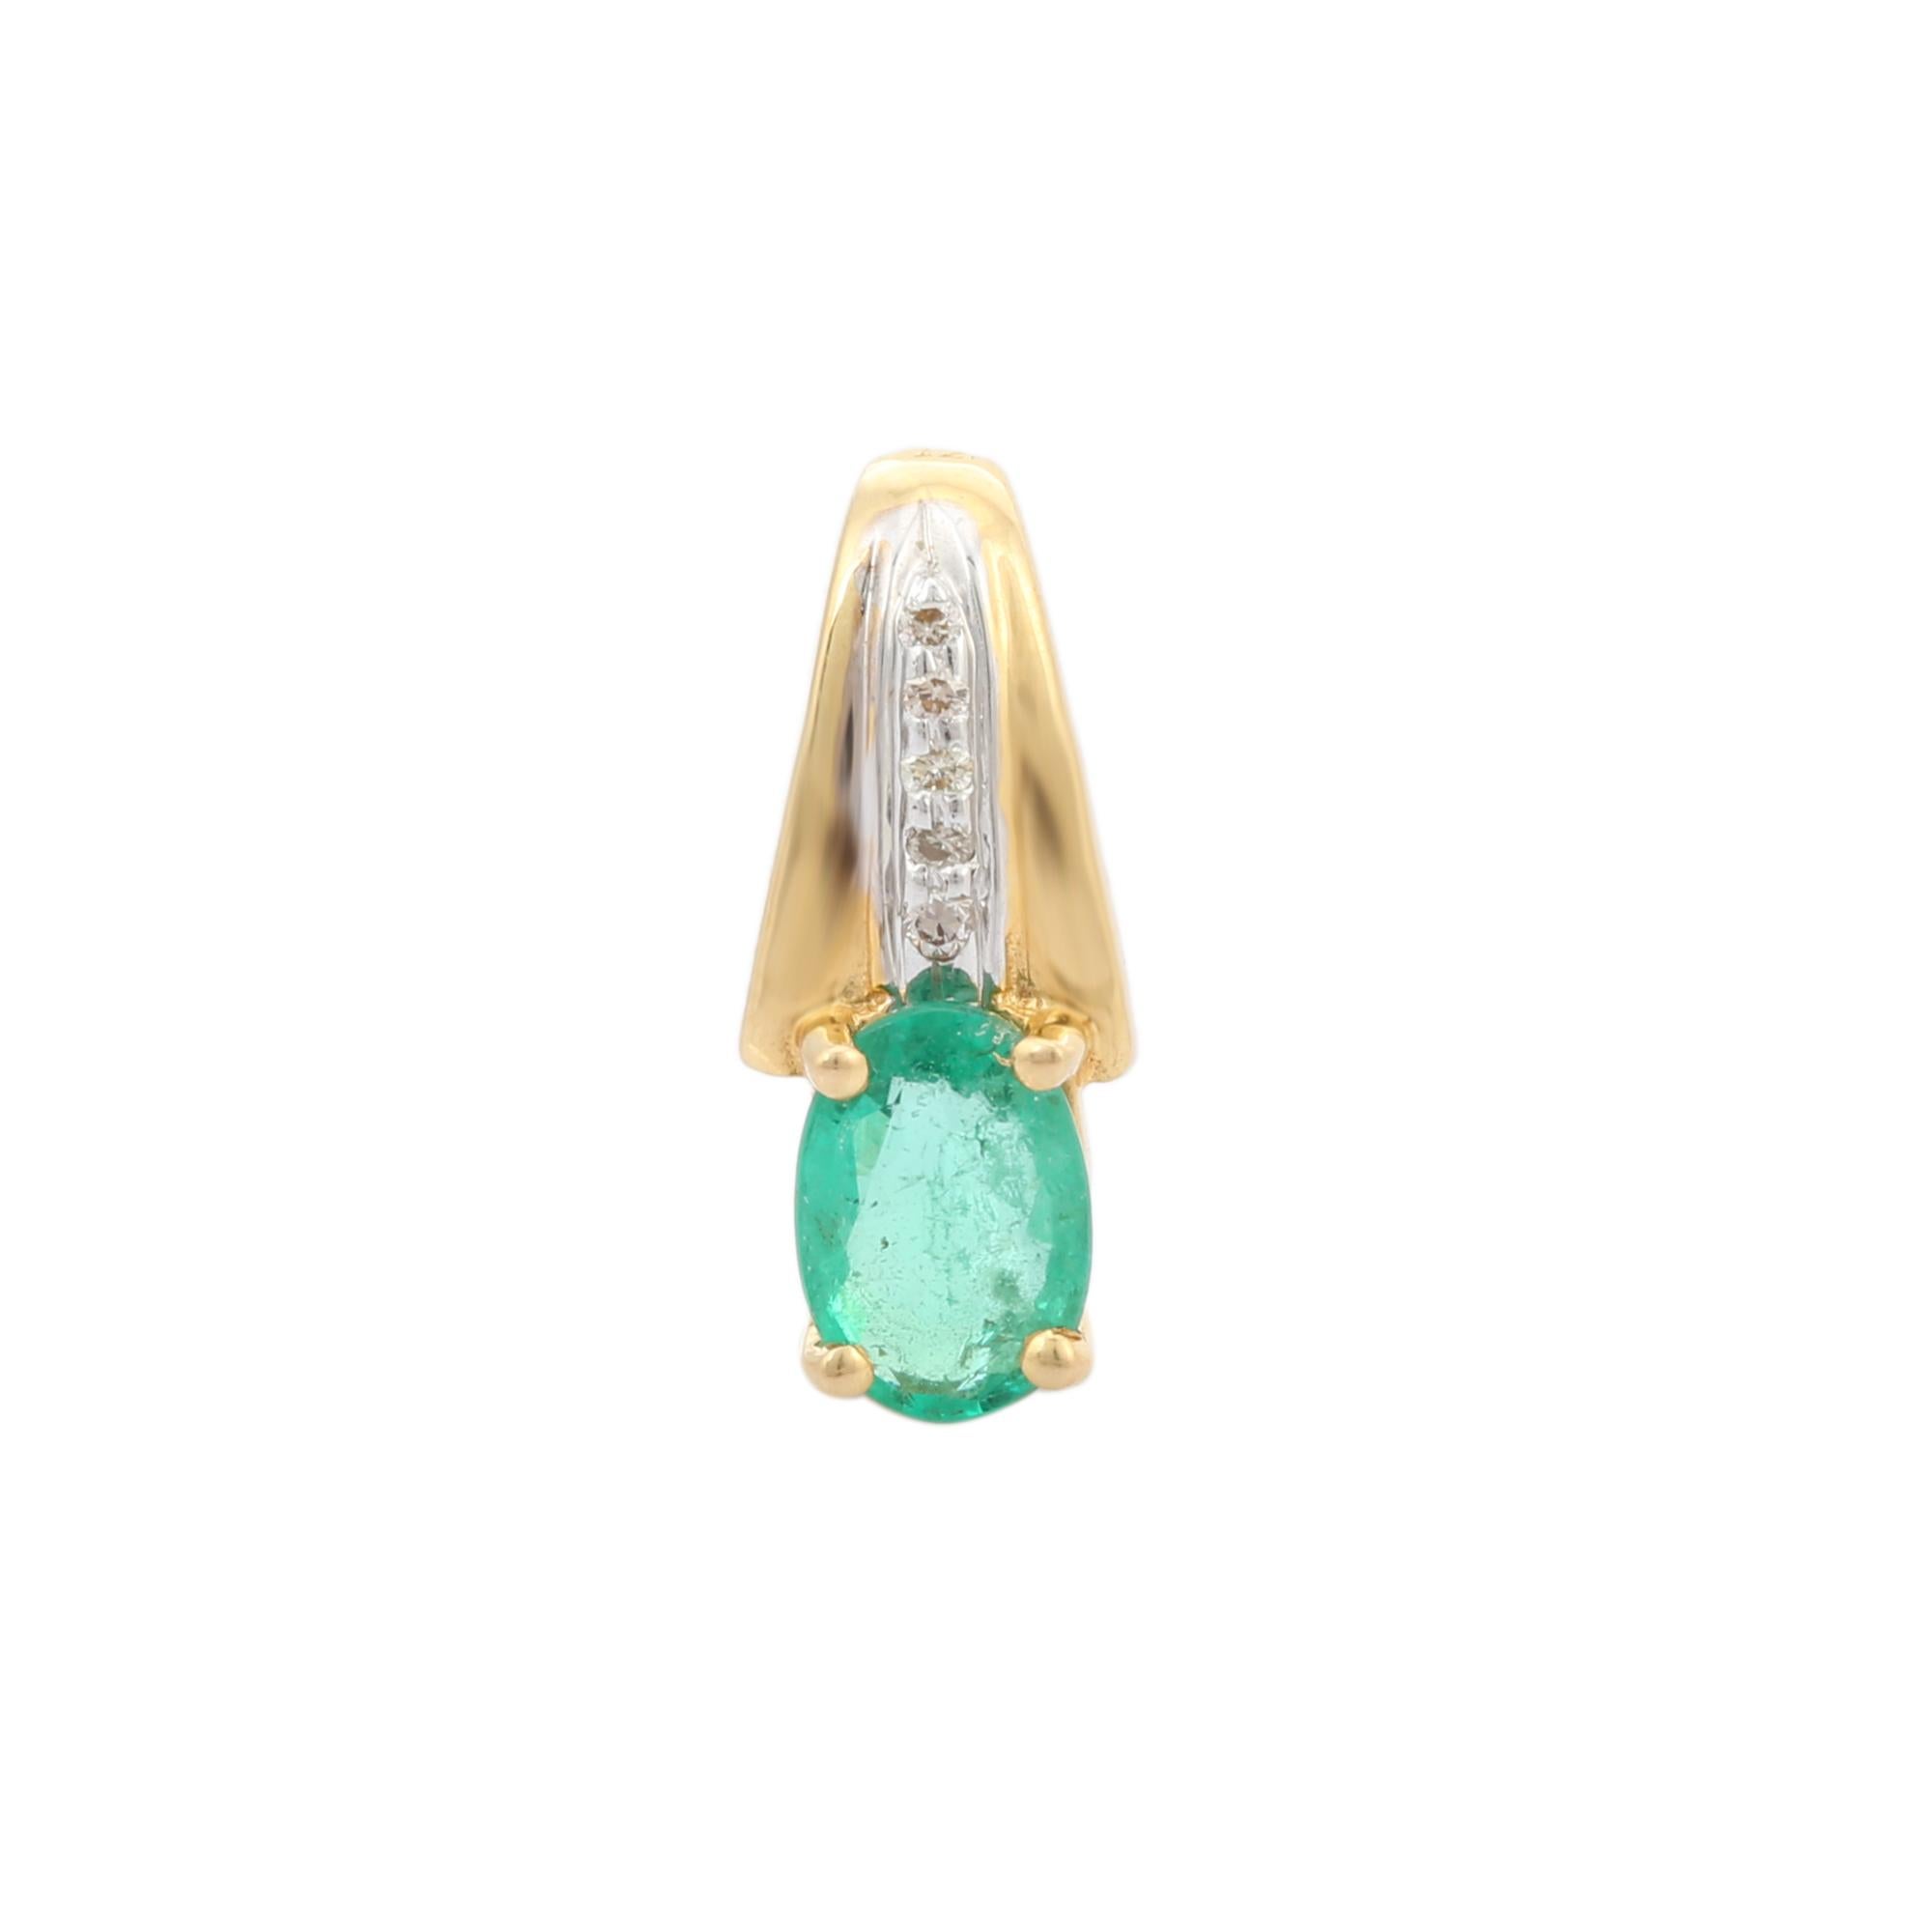 Certified Natural Diamond and Oval Emerald Pendant in 18K Gold. It has a oval cut emerald studded with diamonds that completes your look with a decent touch. Pendants are used to wear or gifted to represent love and promises. It's an attractive